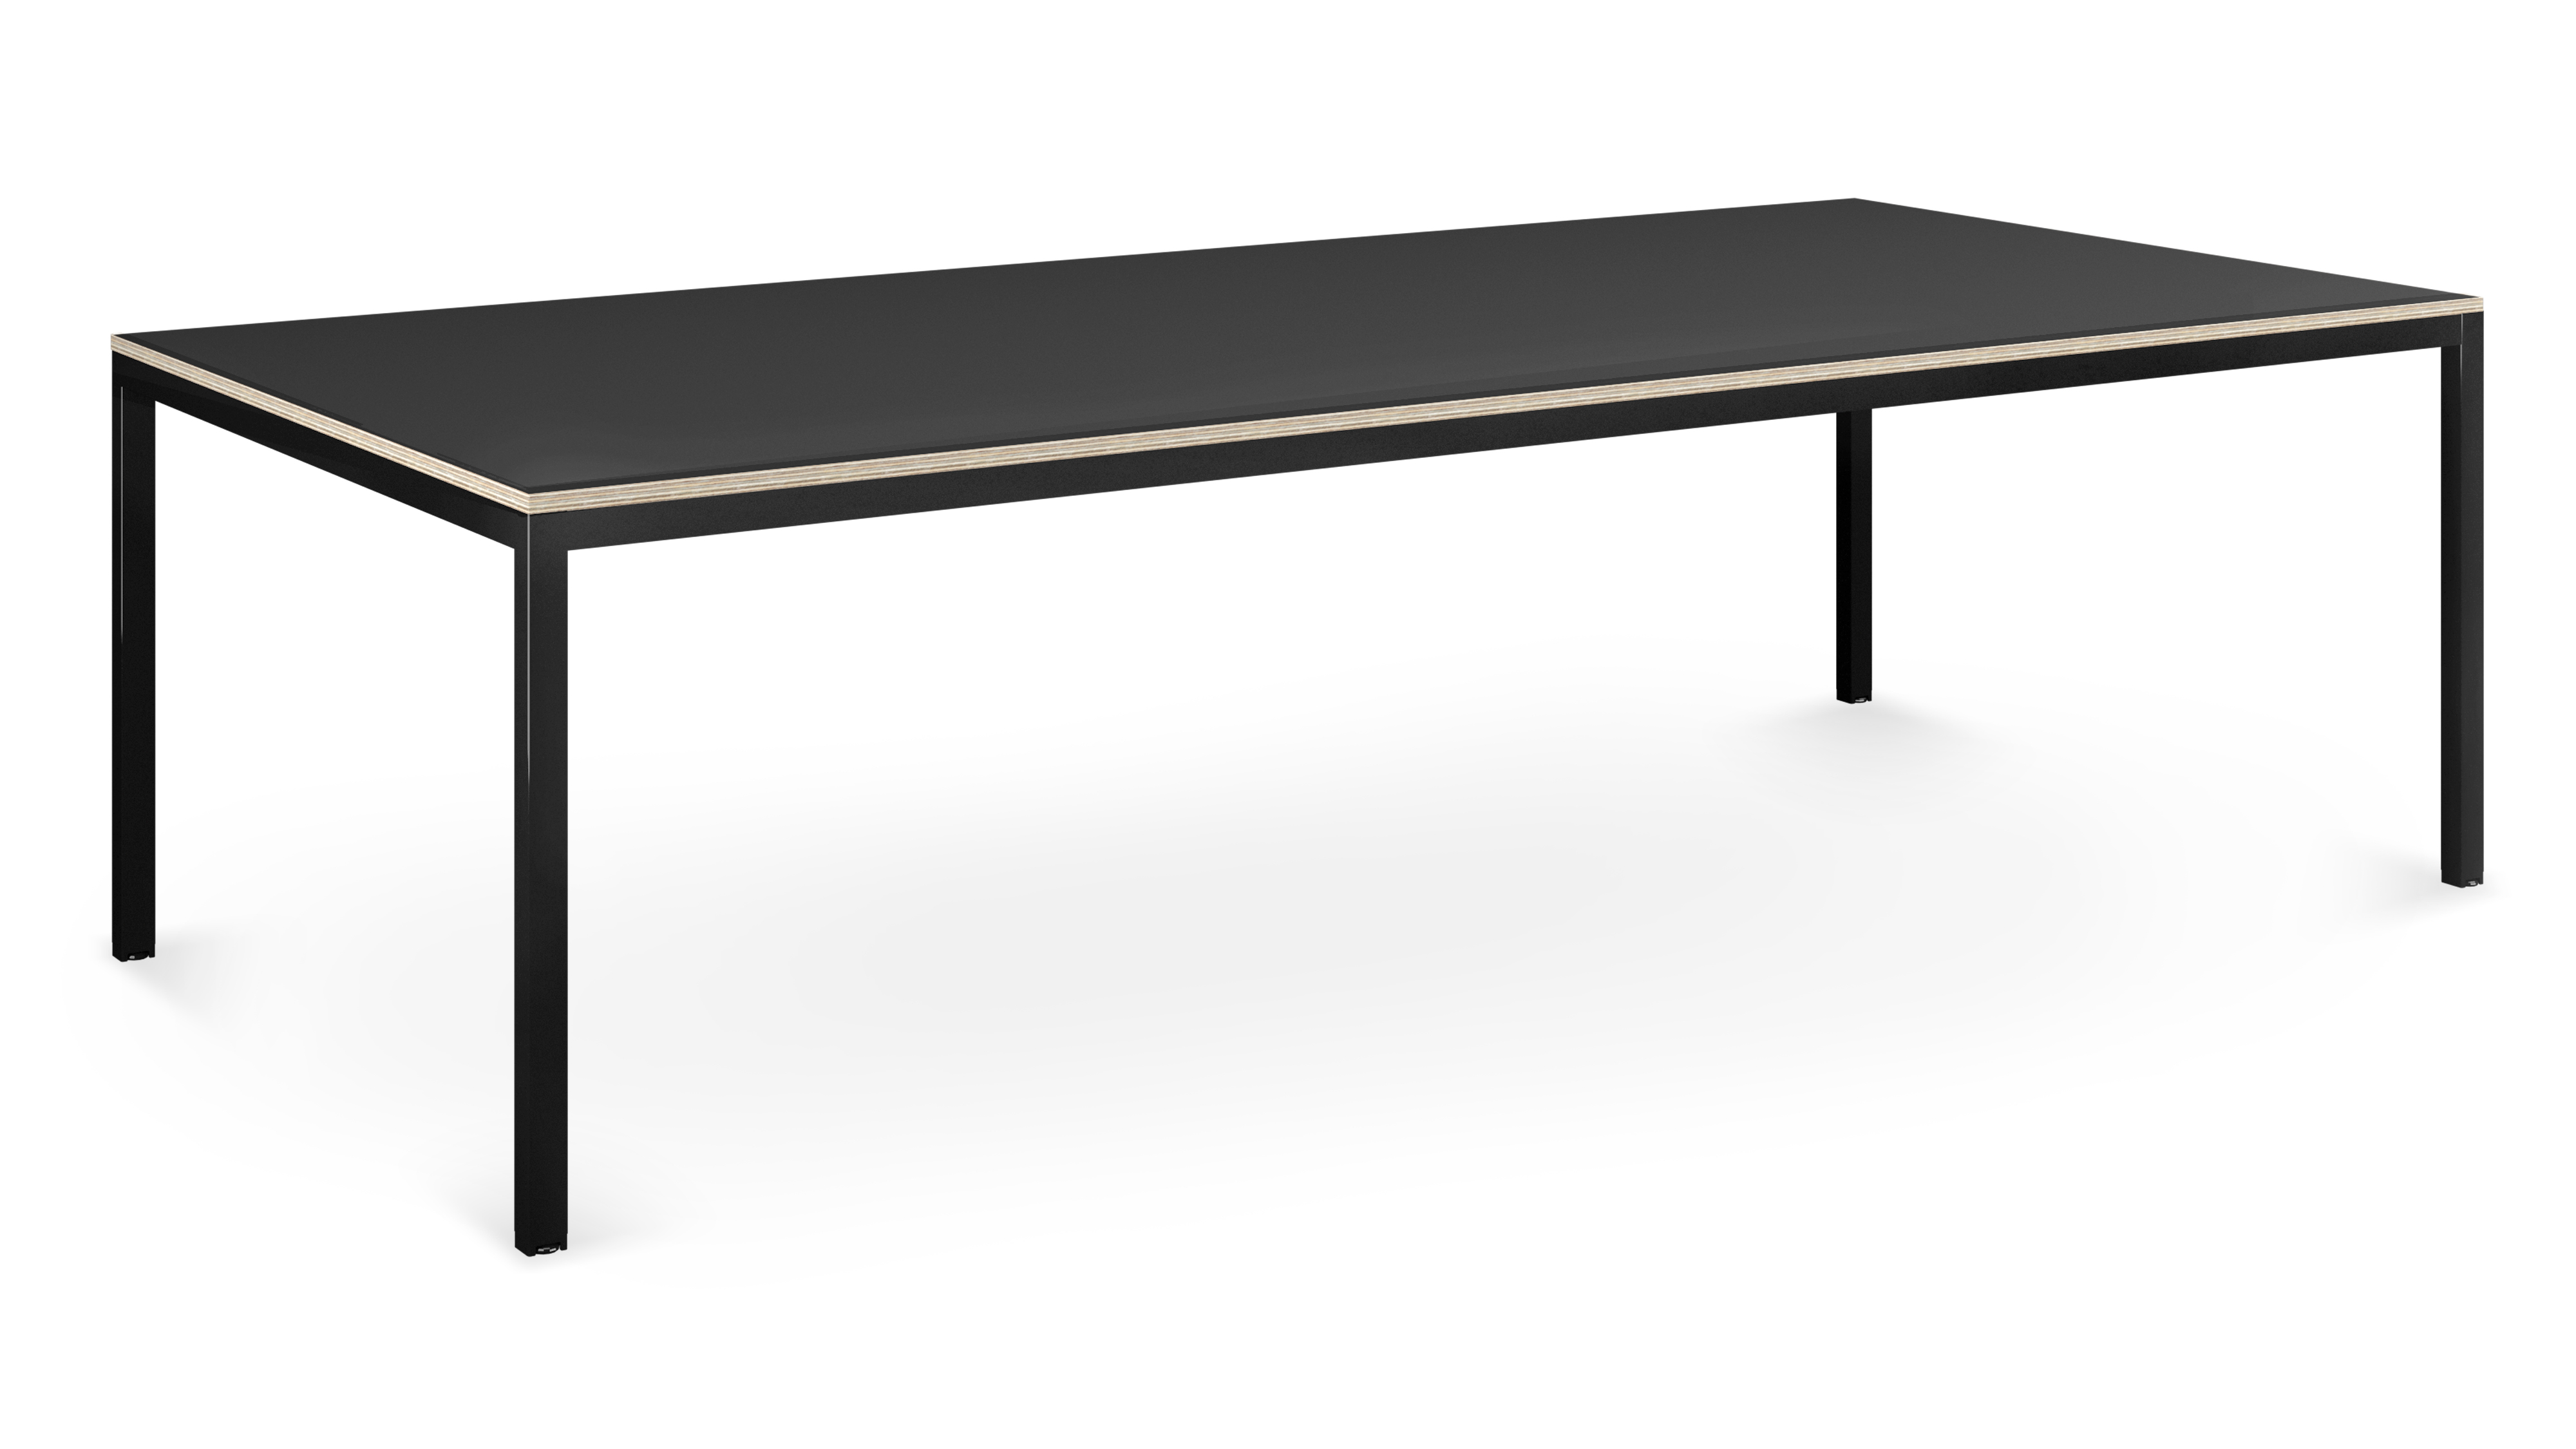 WS -Co.Stories desk - 2380 x 1380 - Black Frame, Black top with ply edge